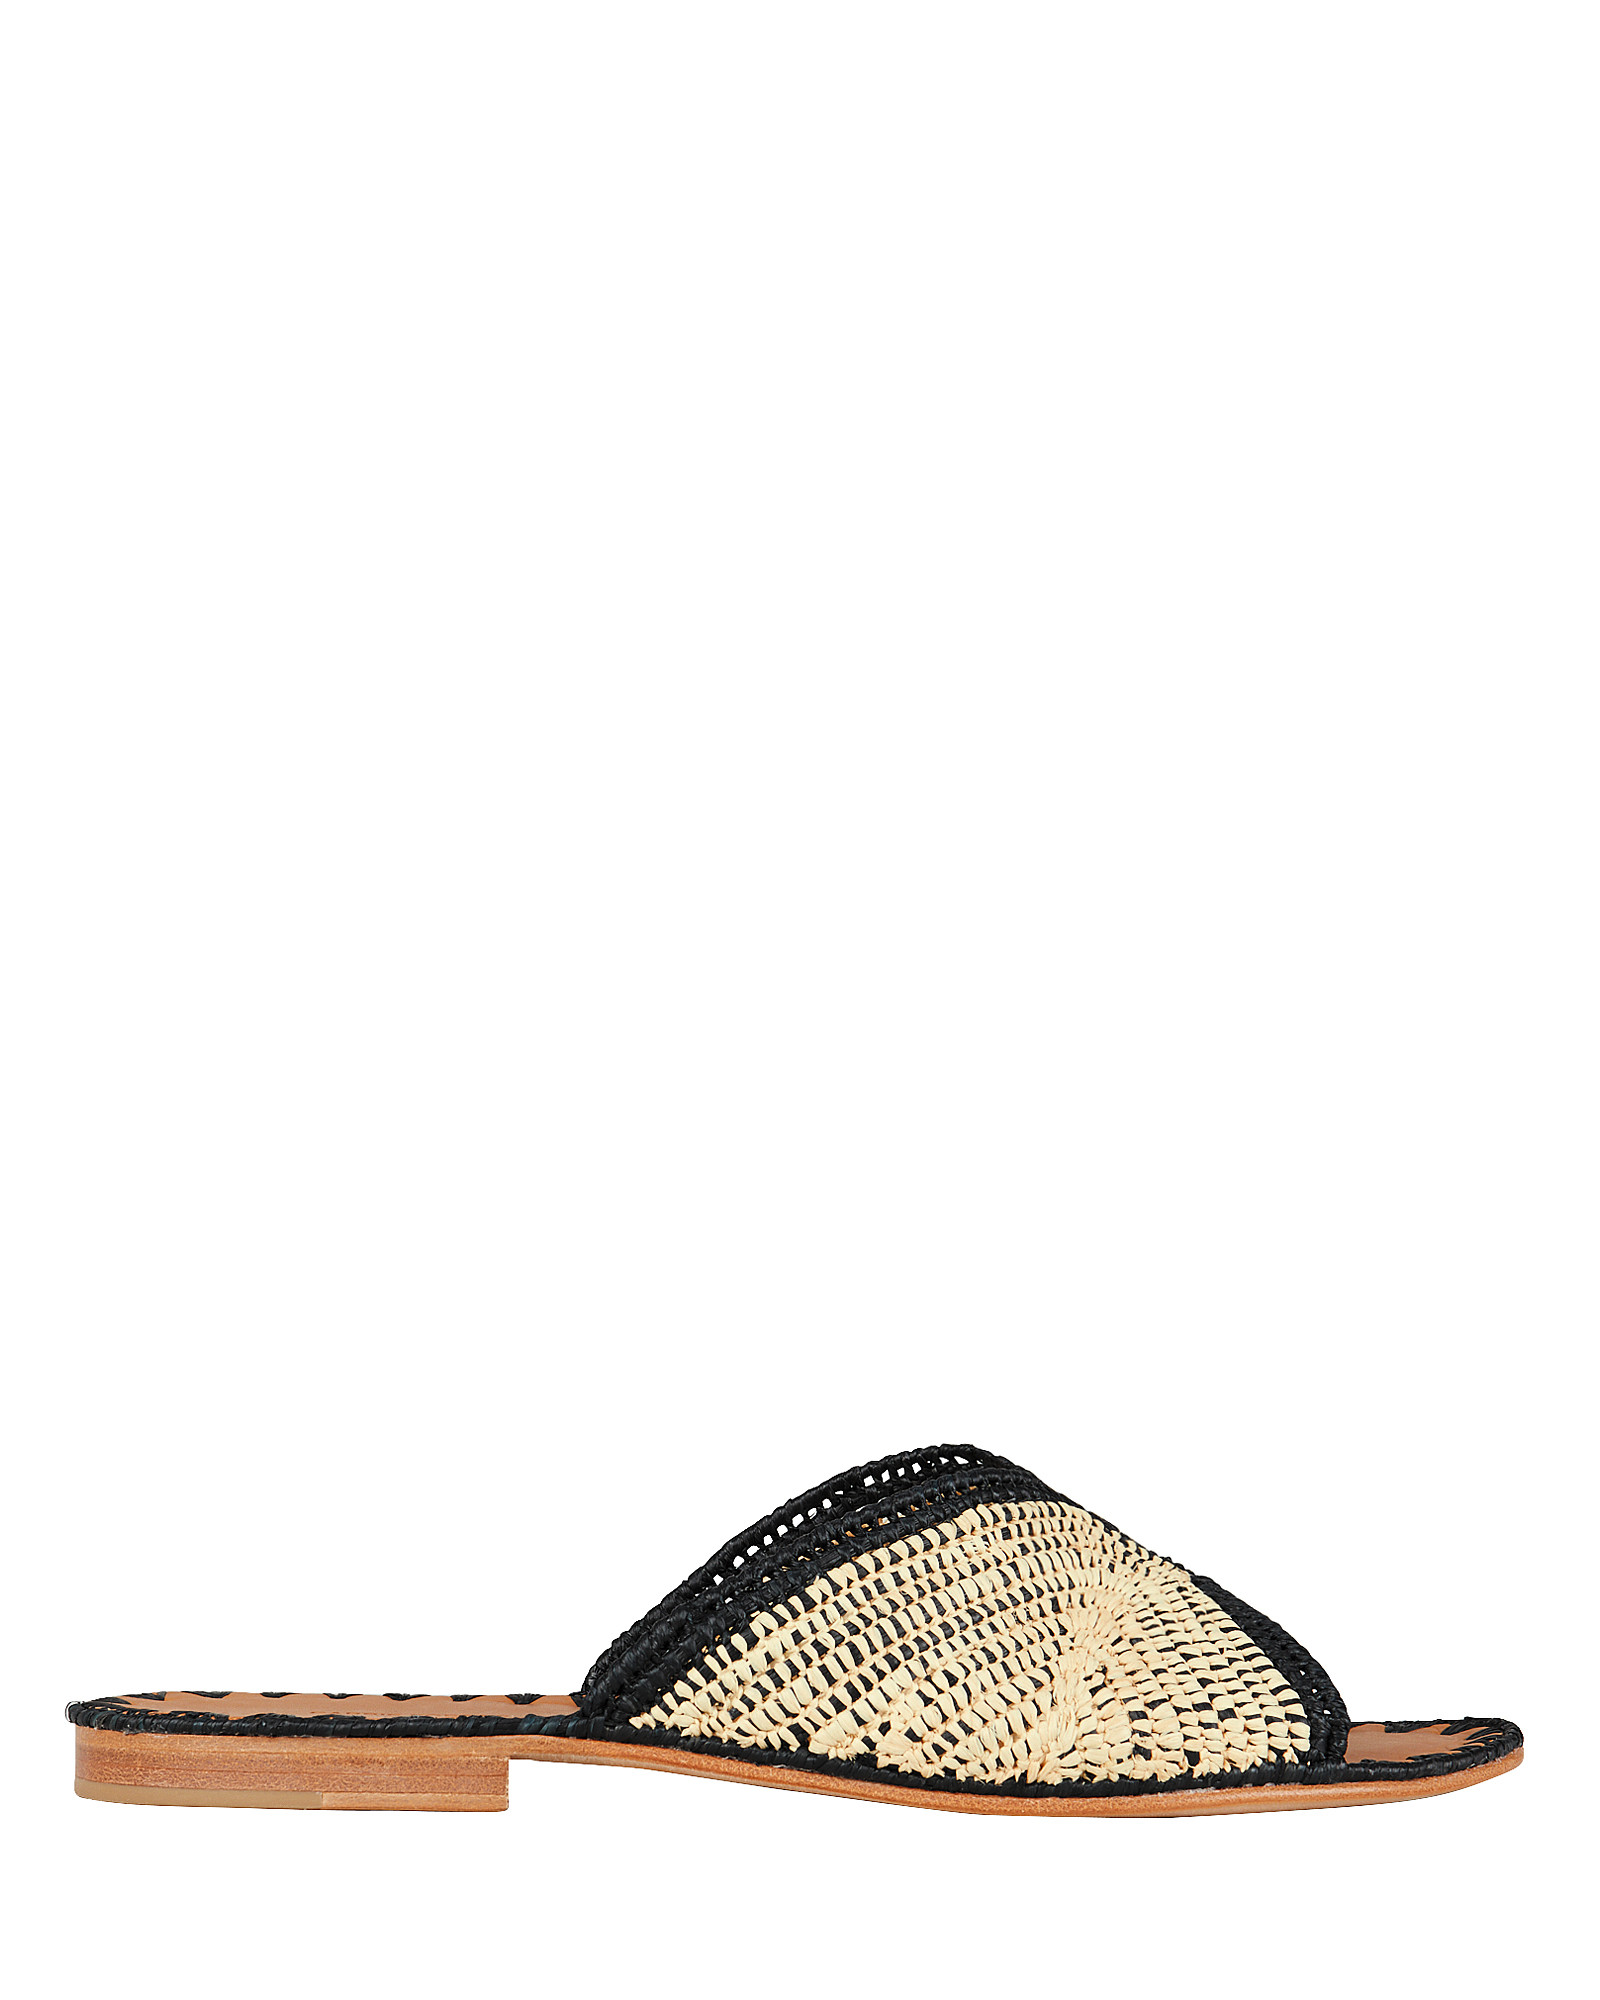 CARRIE FORBES CARRIE FORBES SALON FLAT SANDALS,060027004061